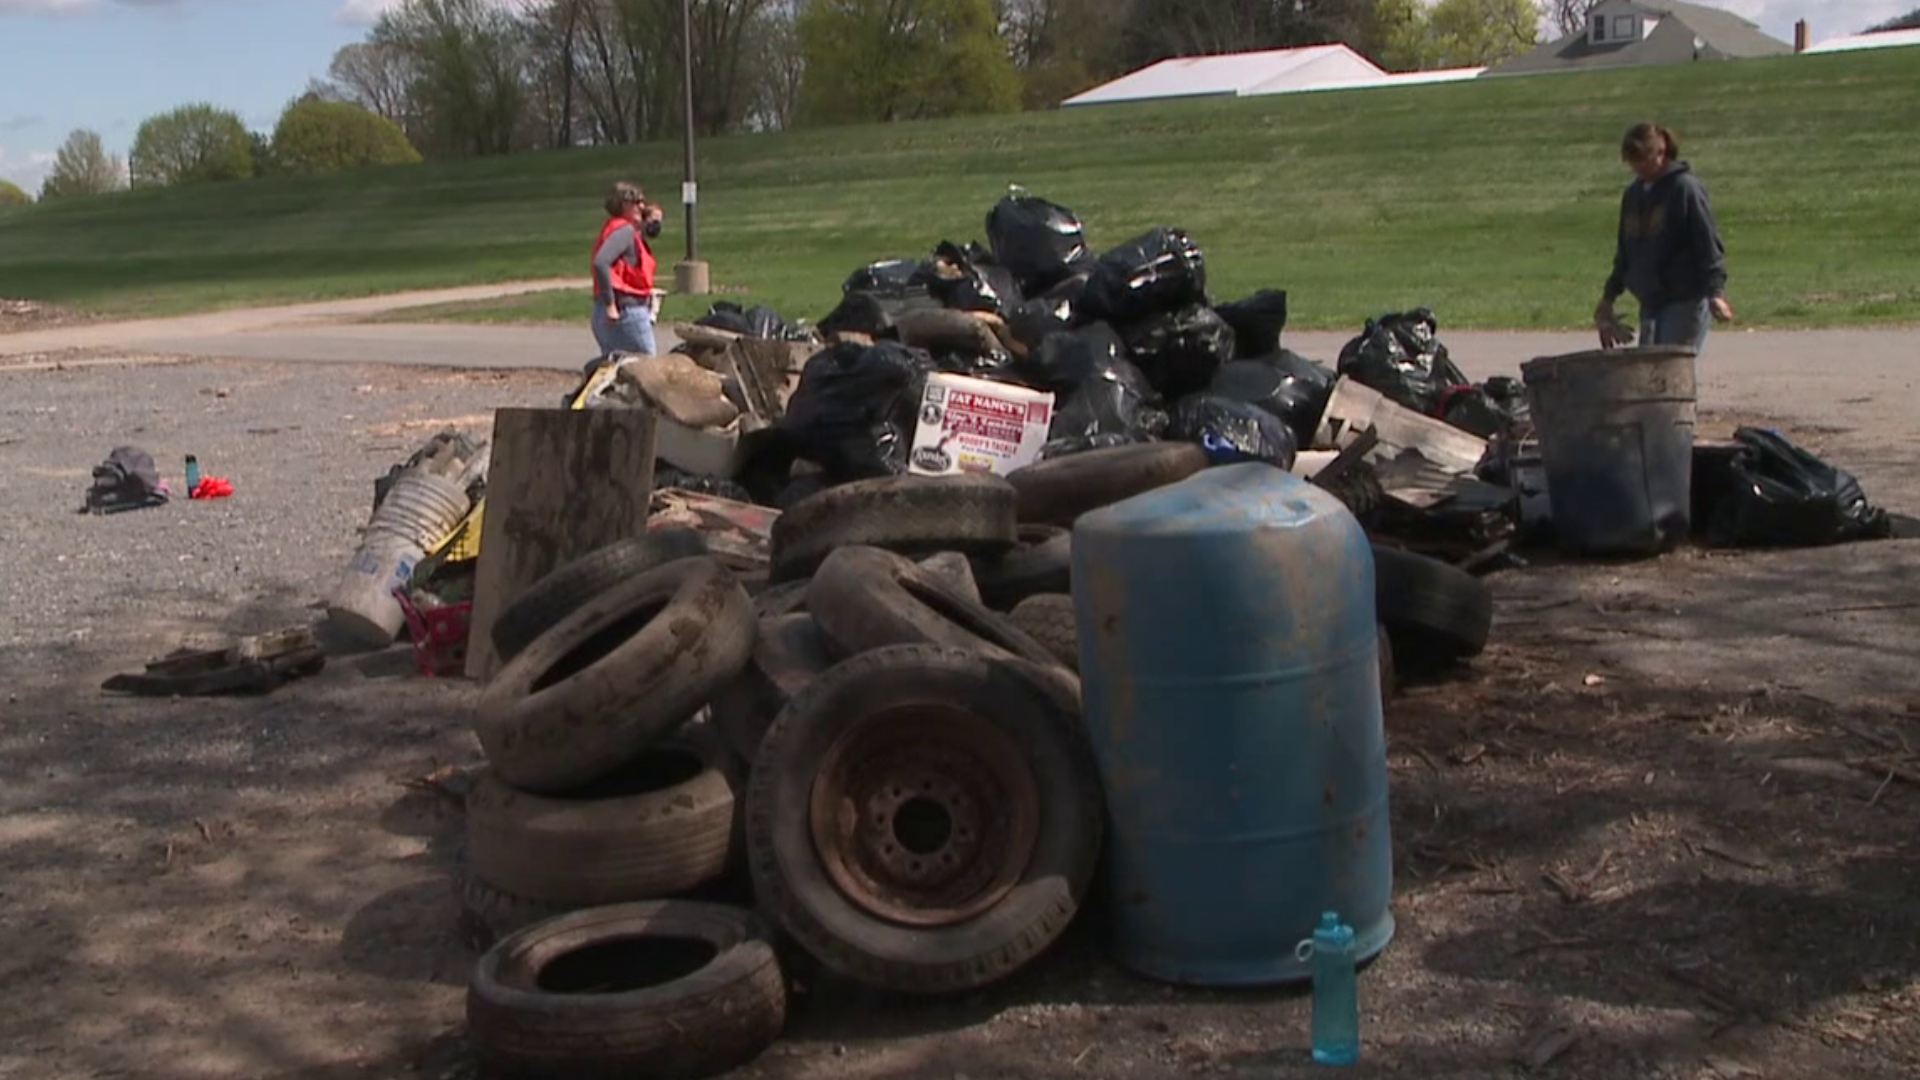 Volunteers say they found lots of plastic, tires, and even masks.